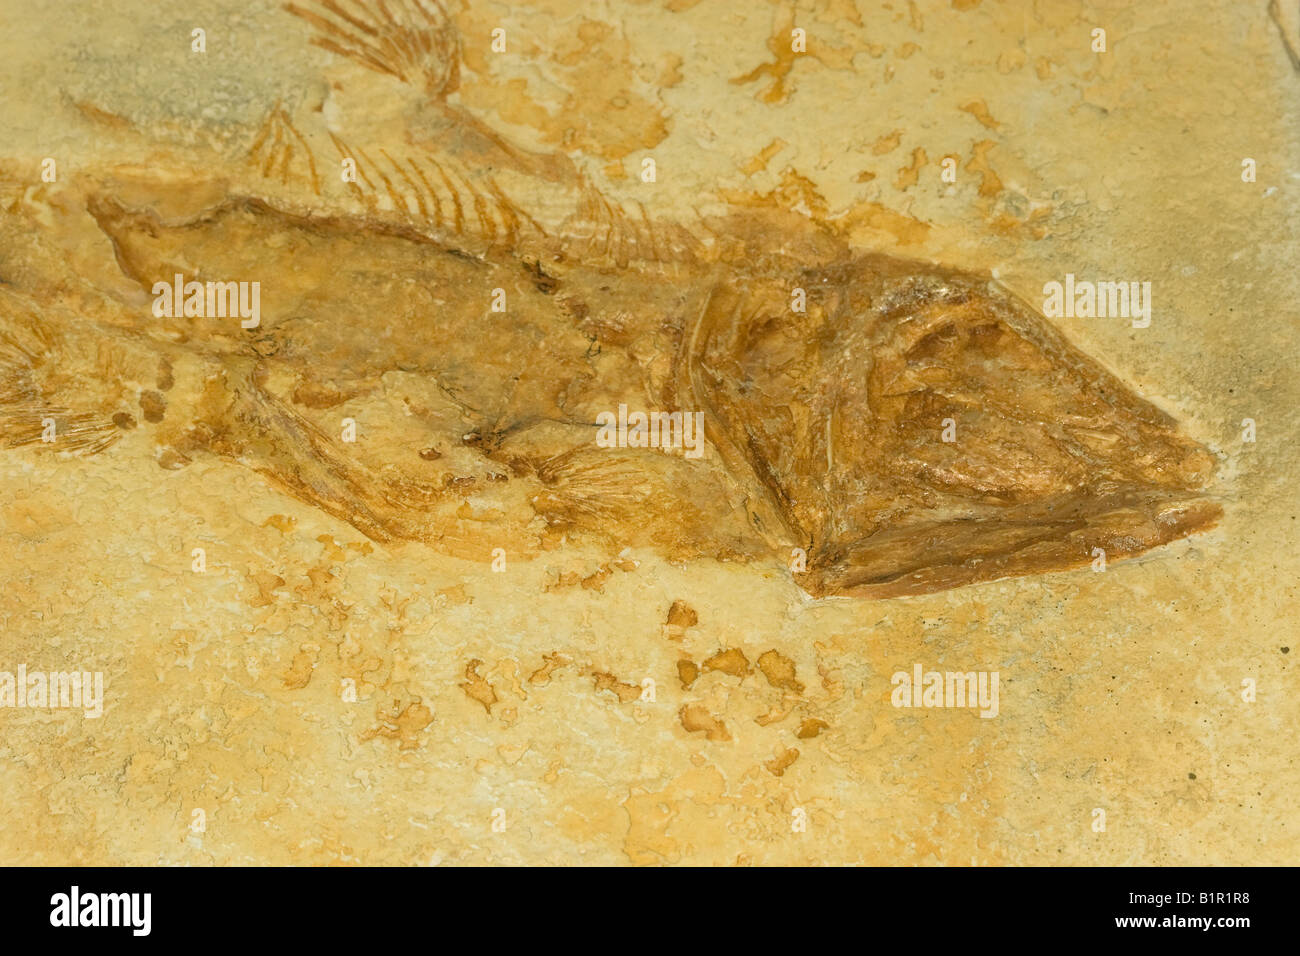 Coccoderma nudum, an early type of Coelecanth, Jurassic Period,  Solnhofen, Germany Stock Photo